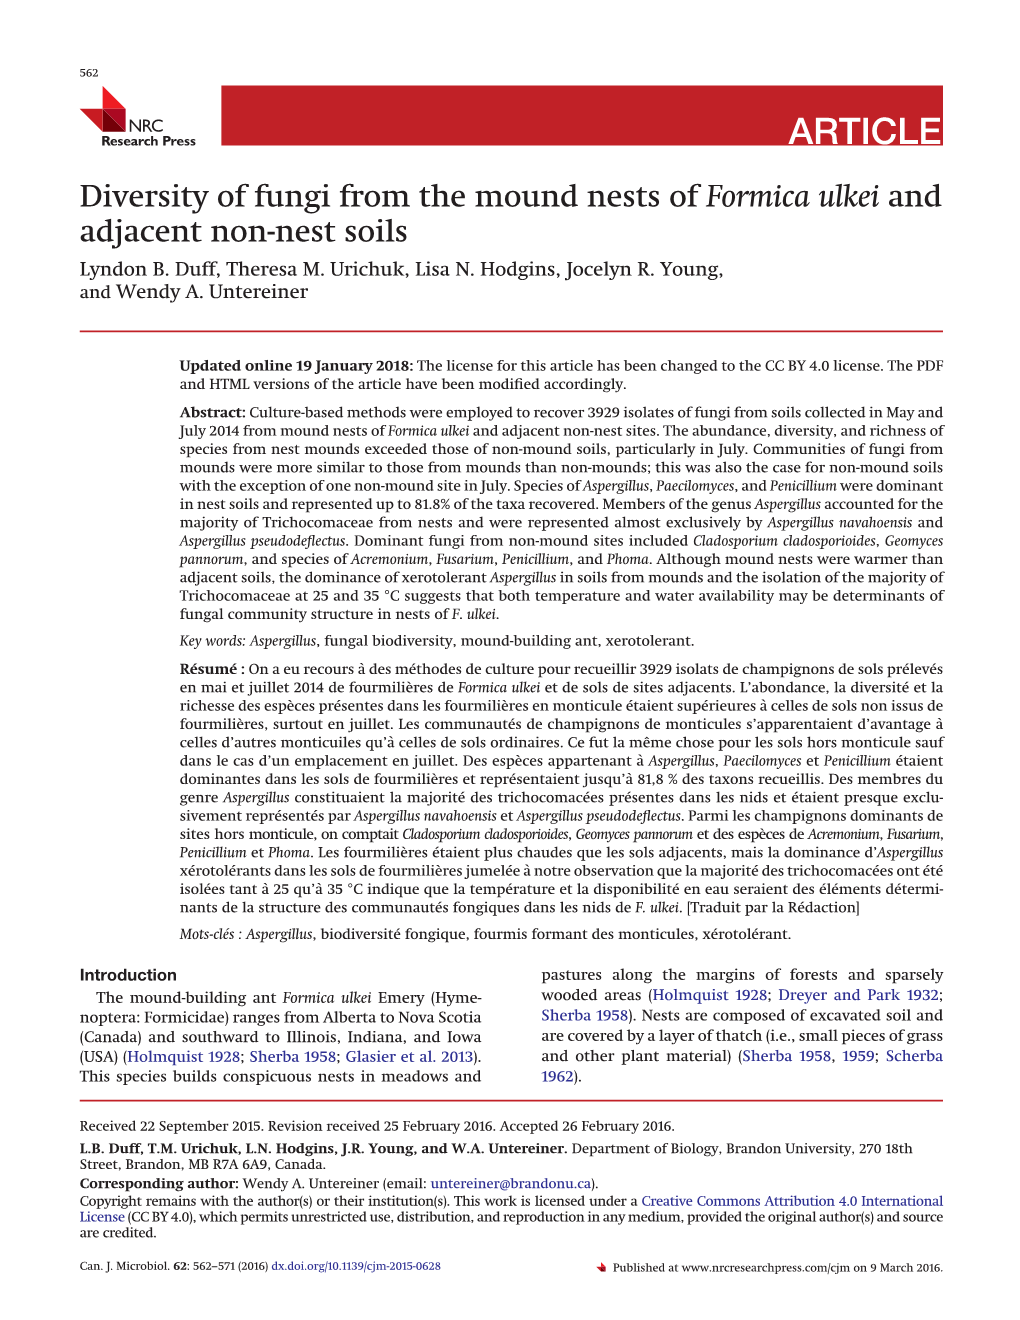 Diversity of Fungi from the Mound Nests of Formica Ulkei and Adjacent Non-Nest Soils Lyndon B